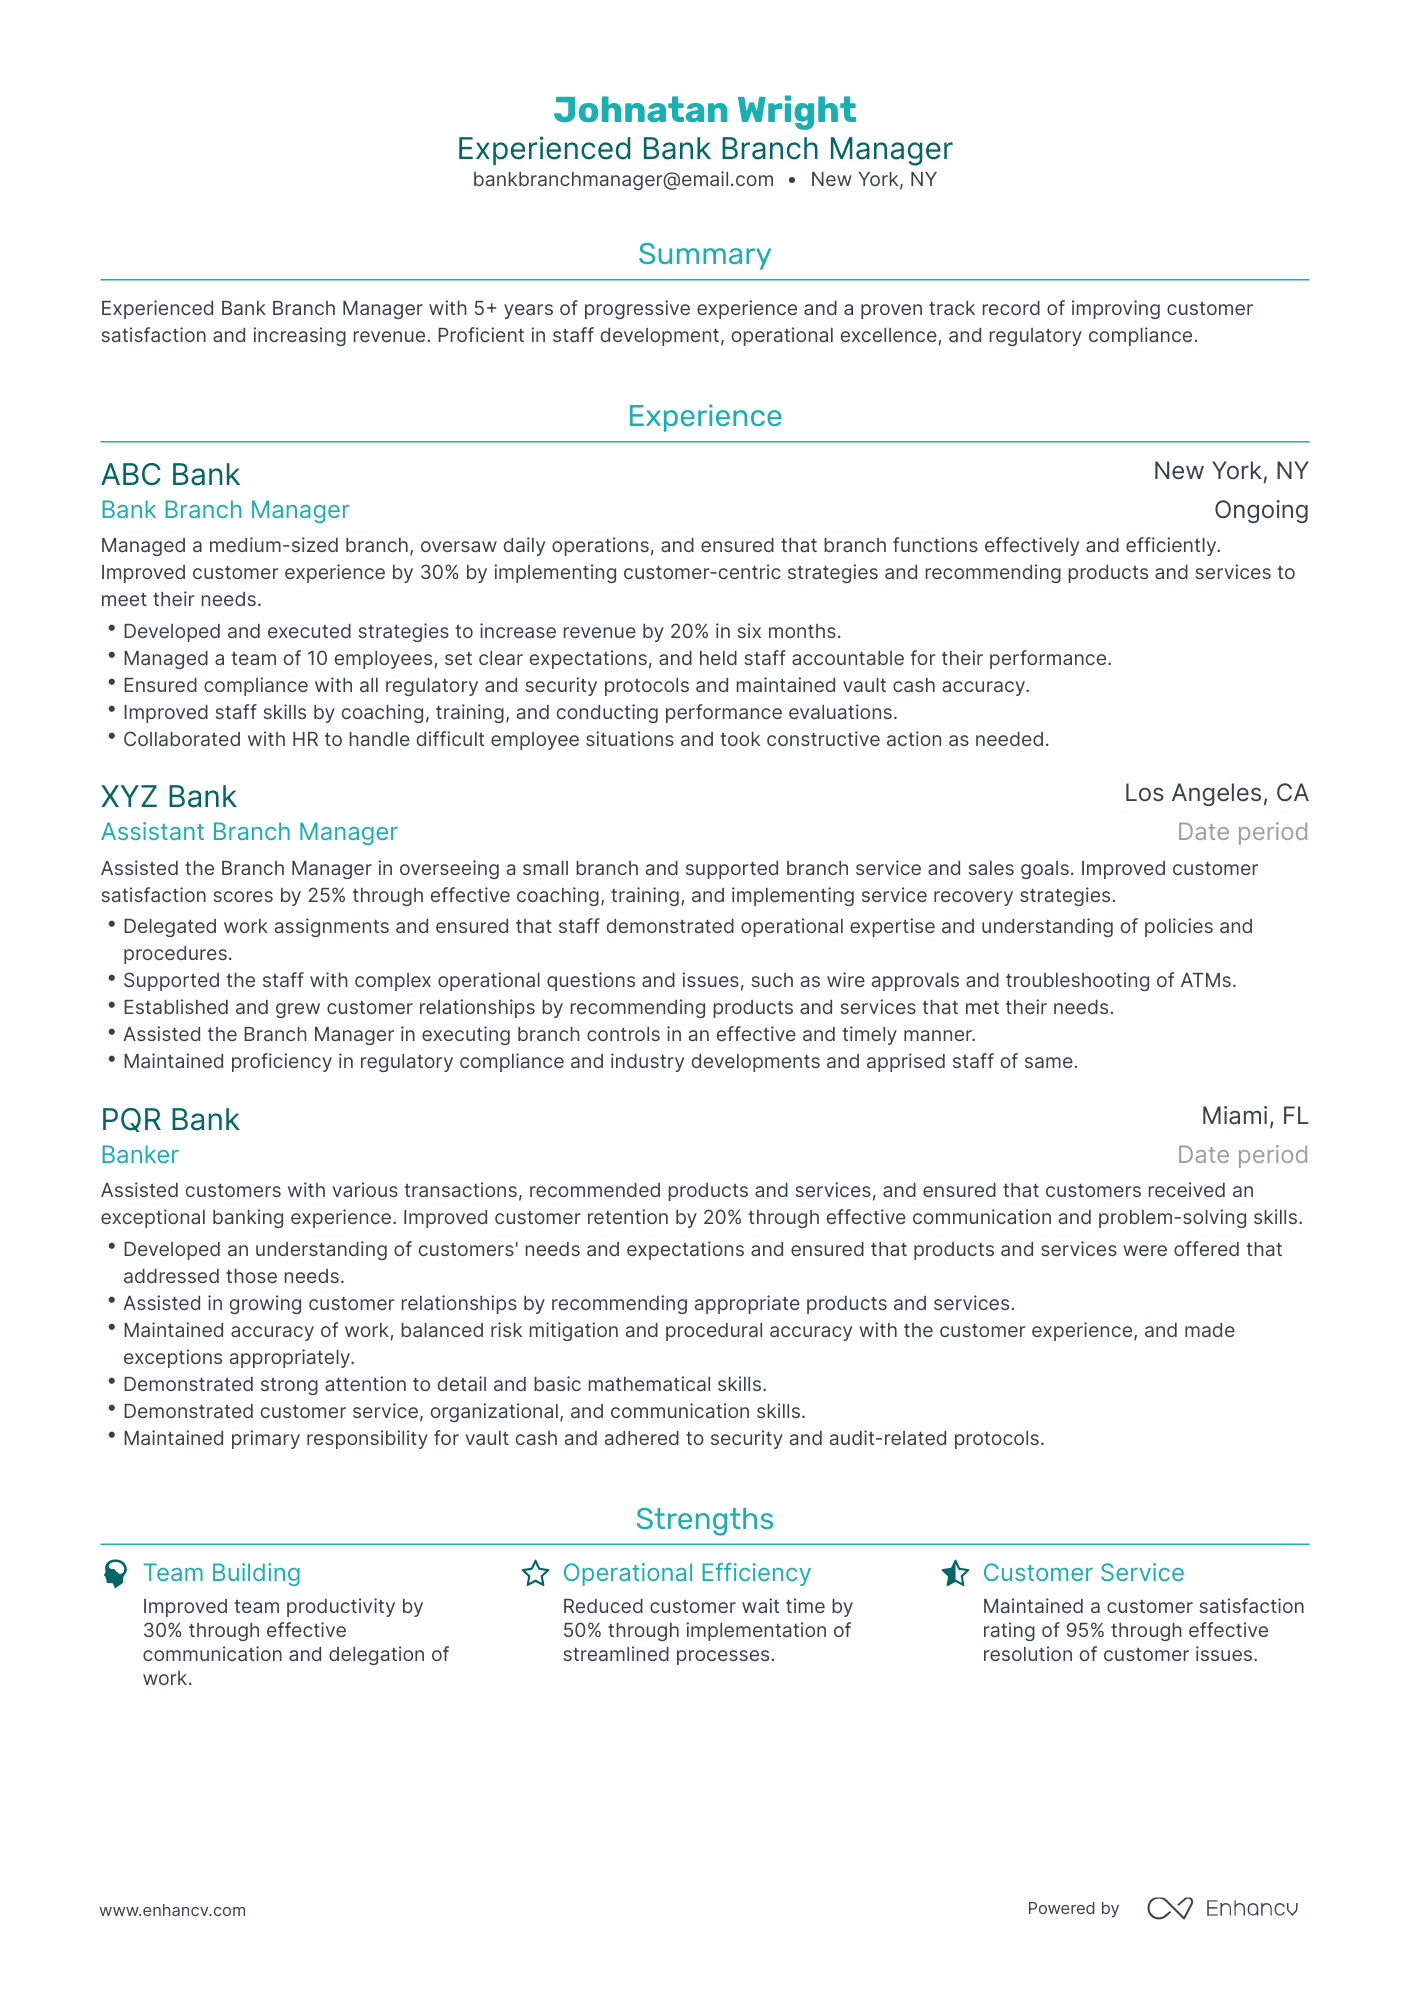 Traditional Bank Branch Manager Resume Template